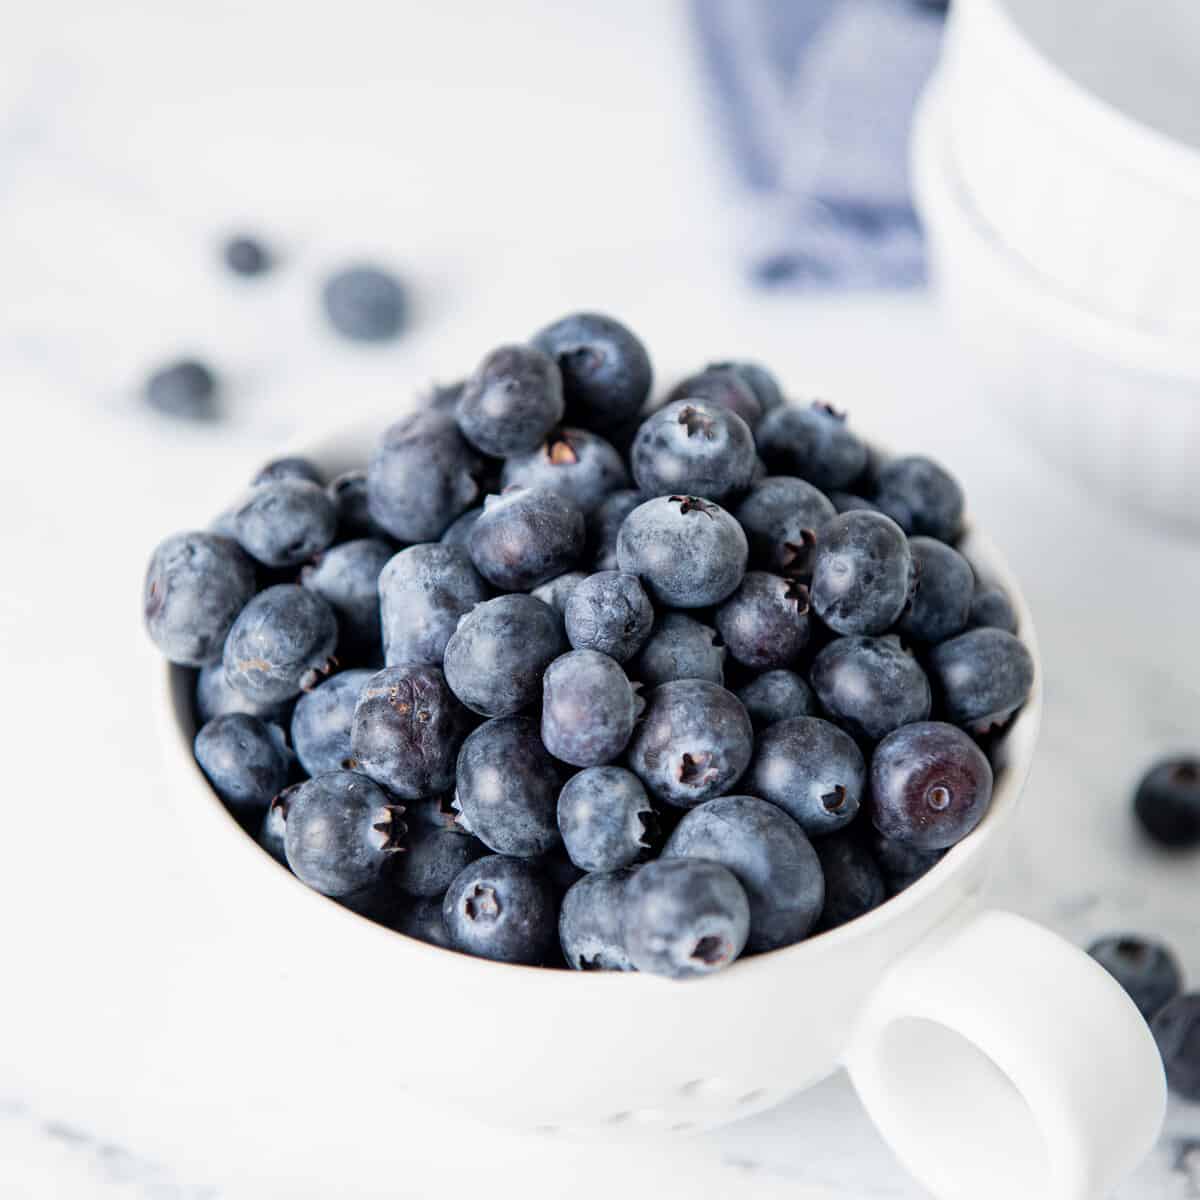 Close-up view of blueberries in a white bowl.